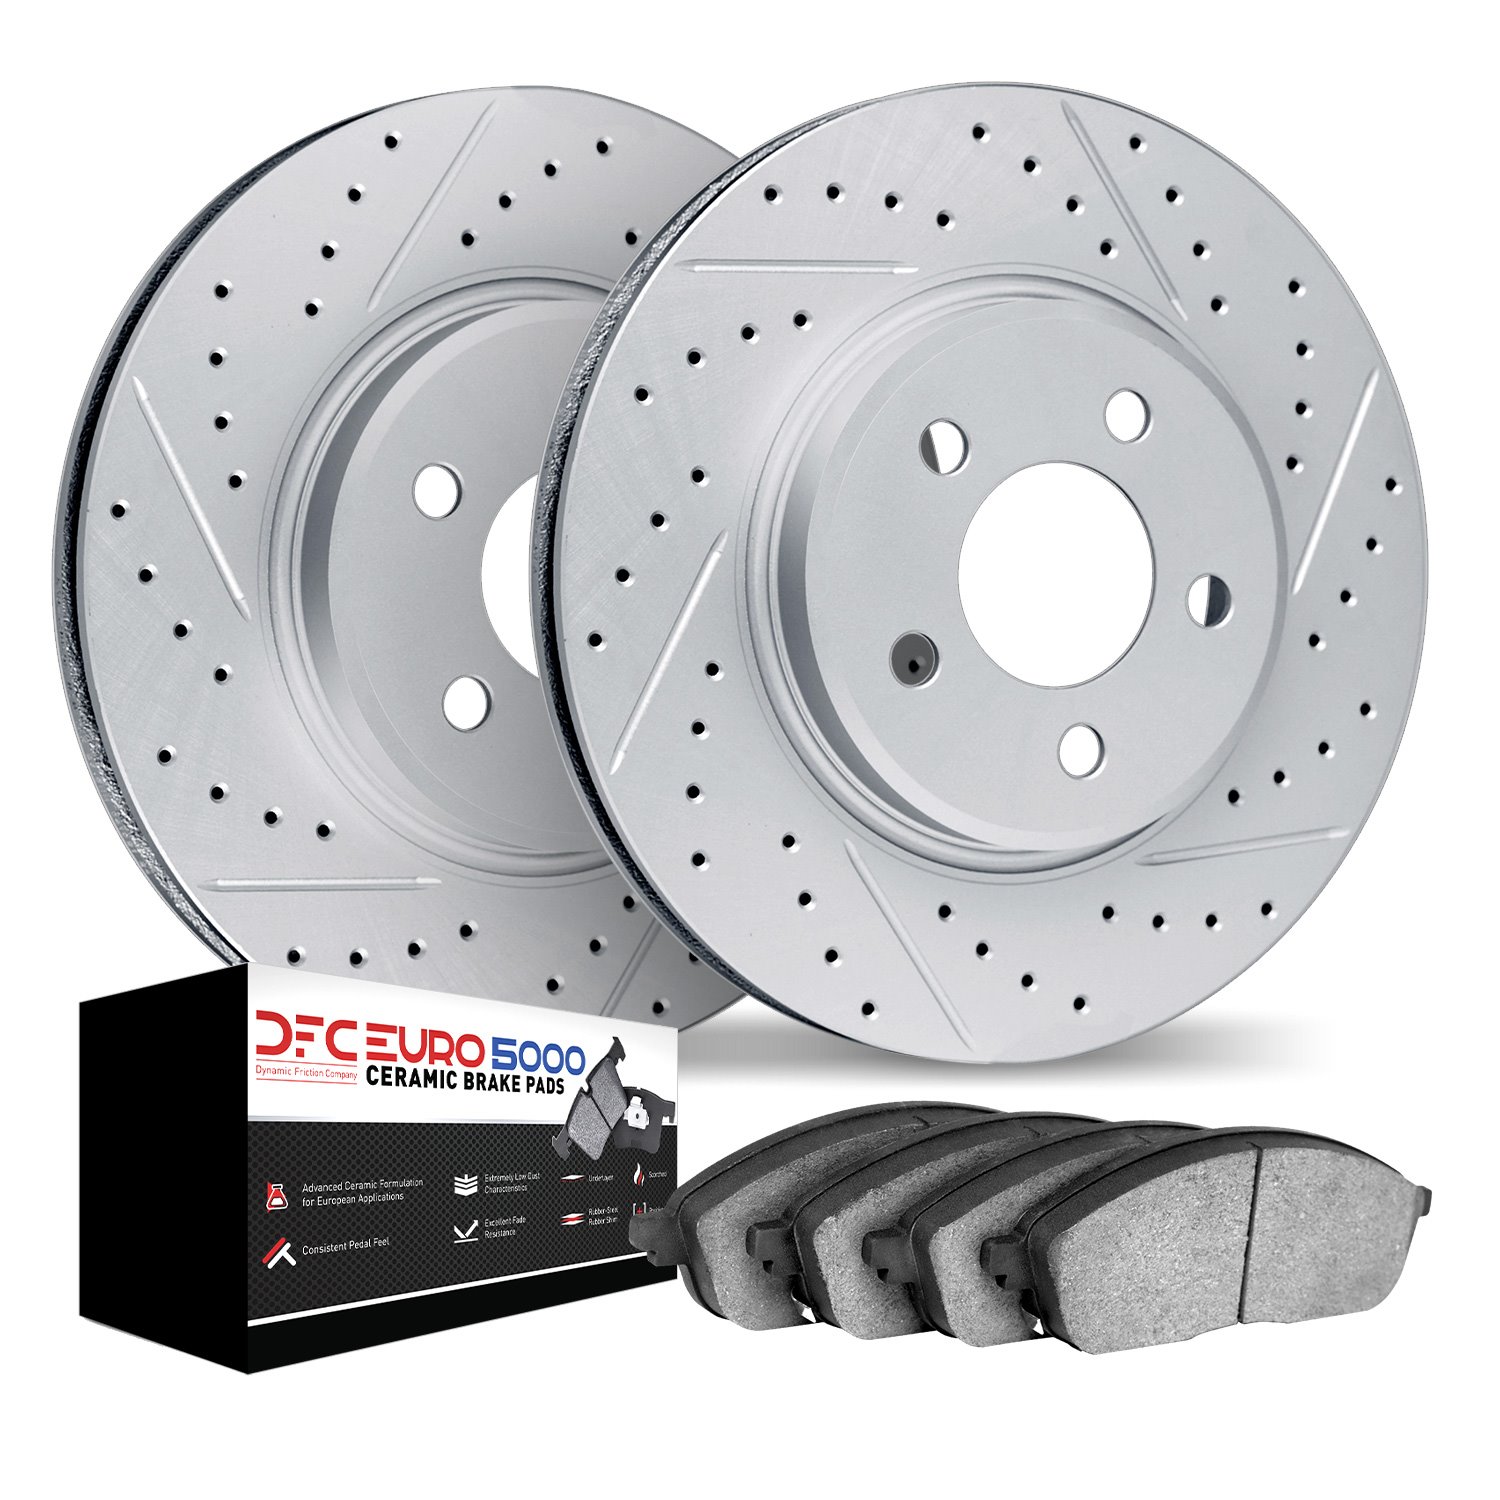 2602-31292 Geoperformance Drilled/Slotted Rotors w/5000 Euro Ceramic Brake Pads Kit, Fits Select Multiple Makes/Models, Position